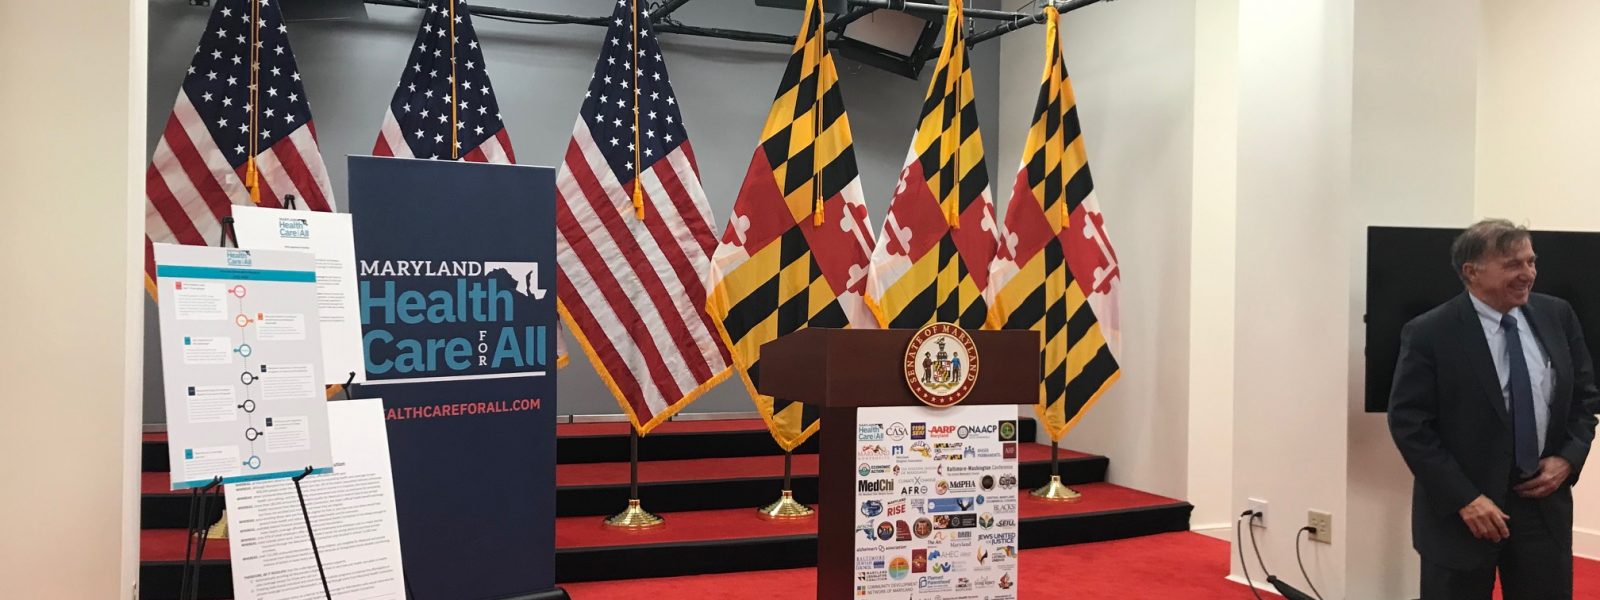 Empty room with Maryland flags, podium, United States flags and posters about the health care agenda